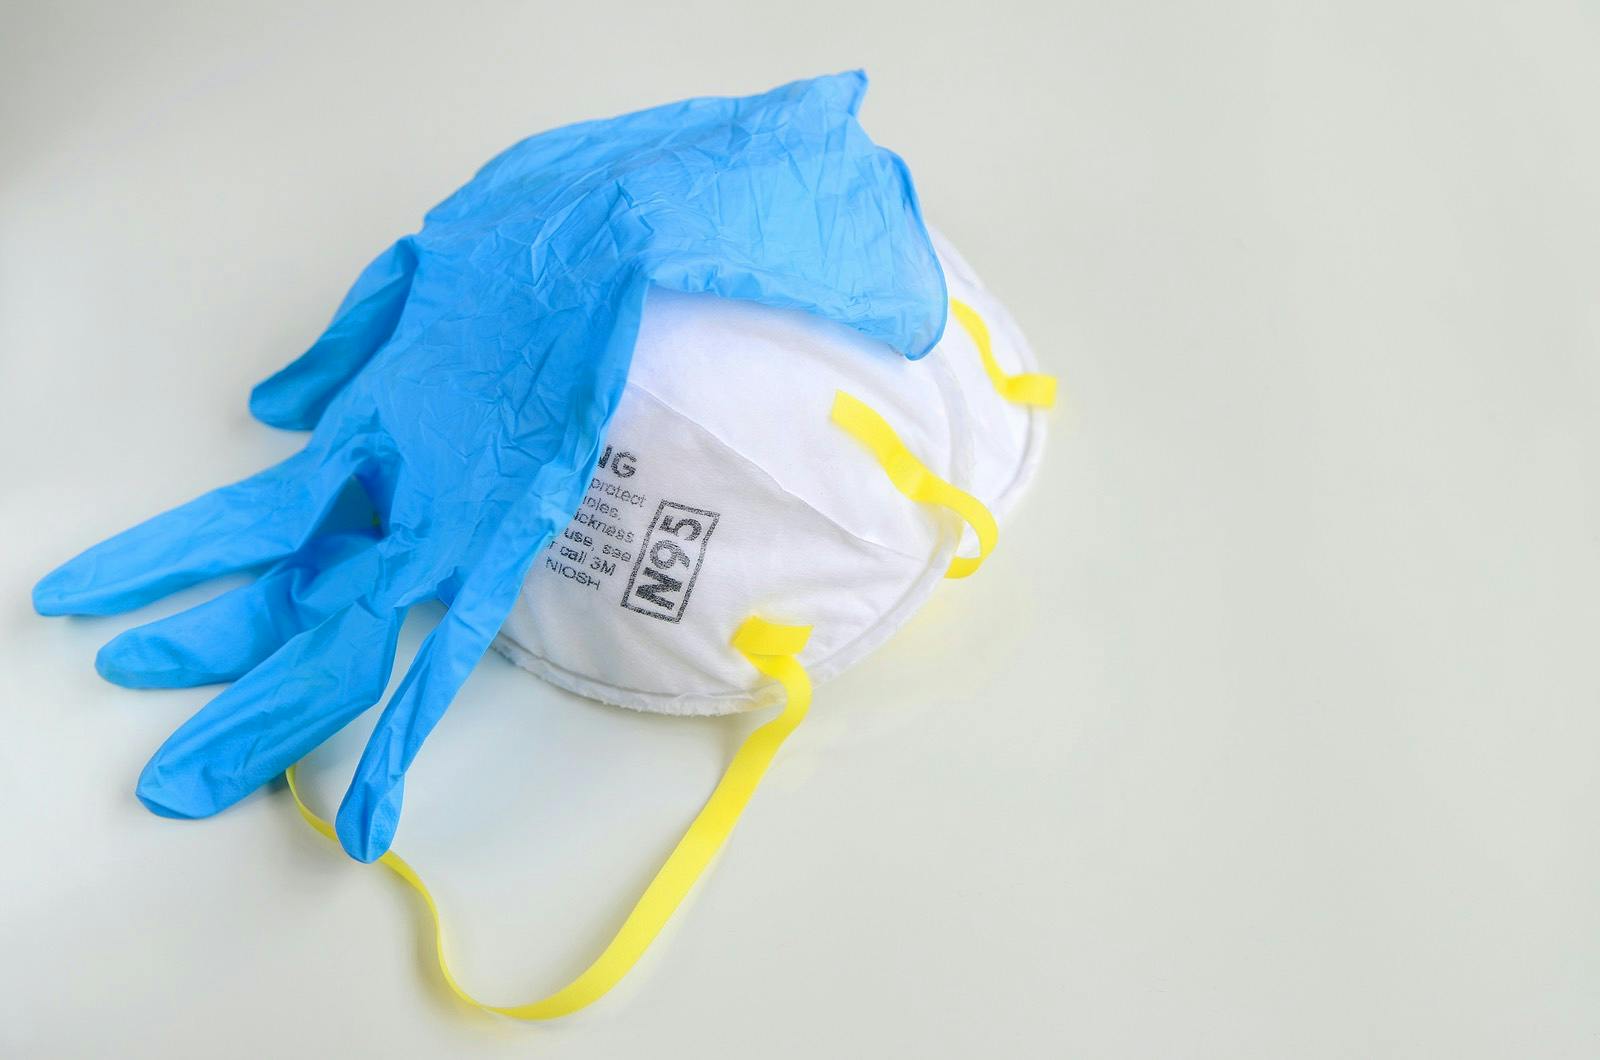 N95 respirator with medical glove on grey background for covid-19 Coronavirus prevention concept.
